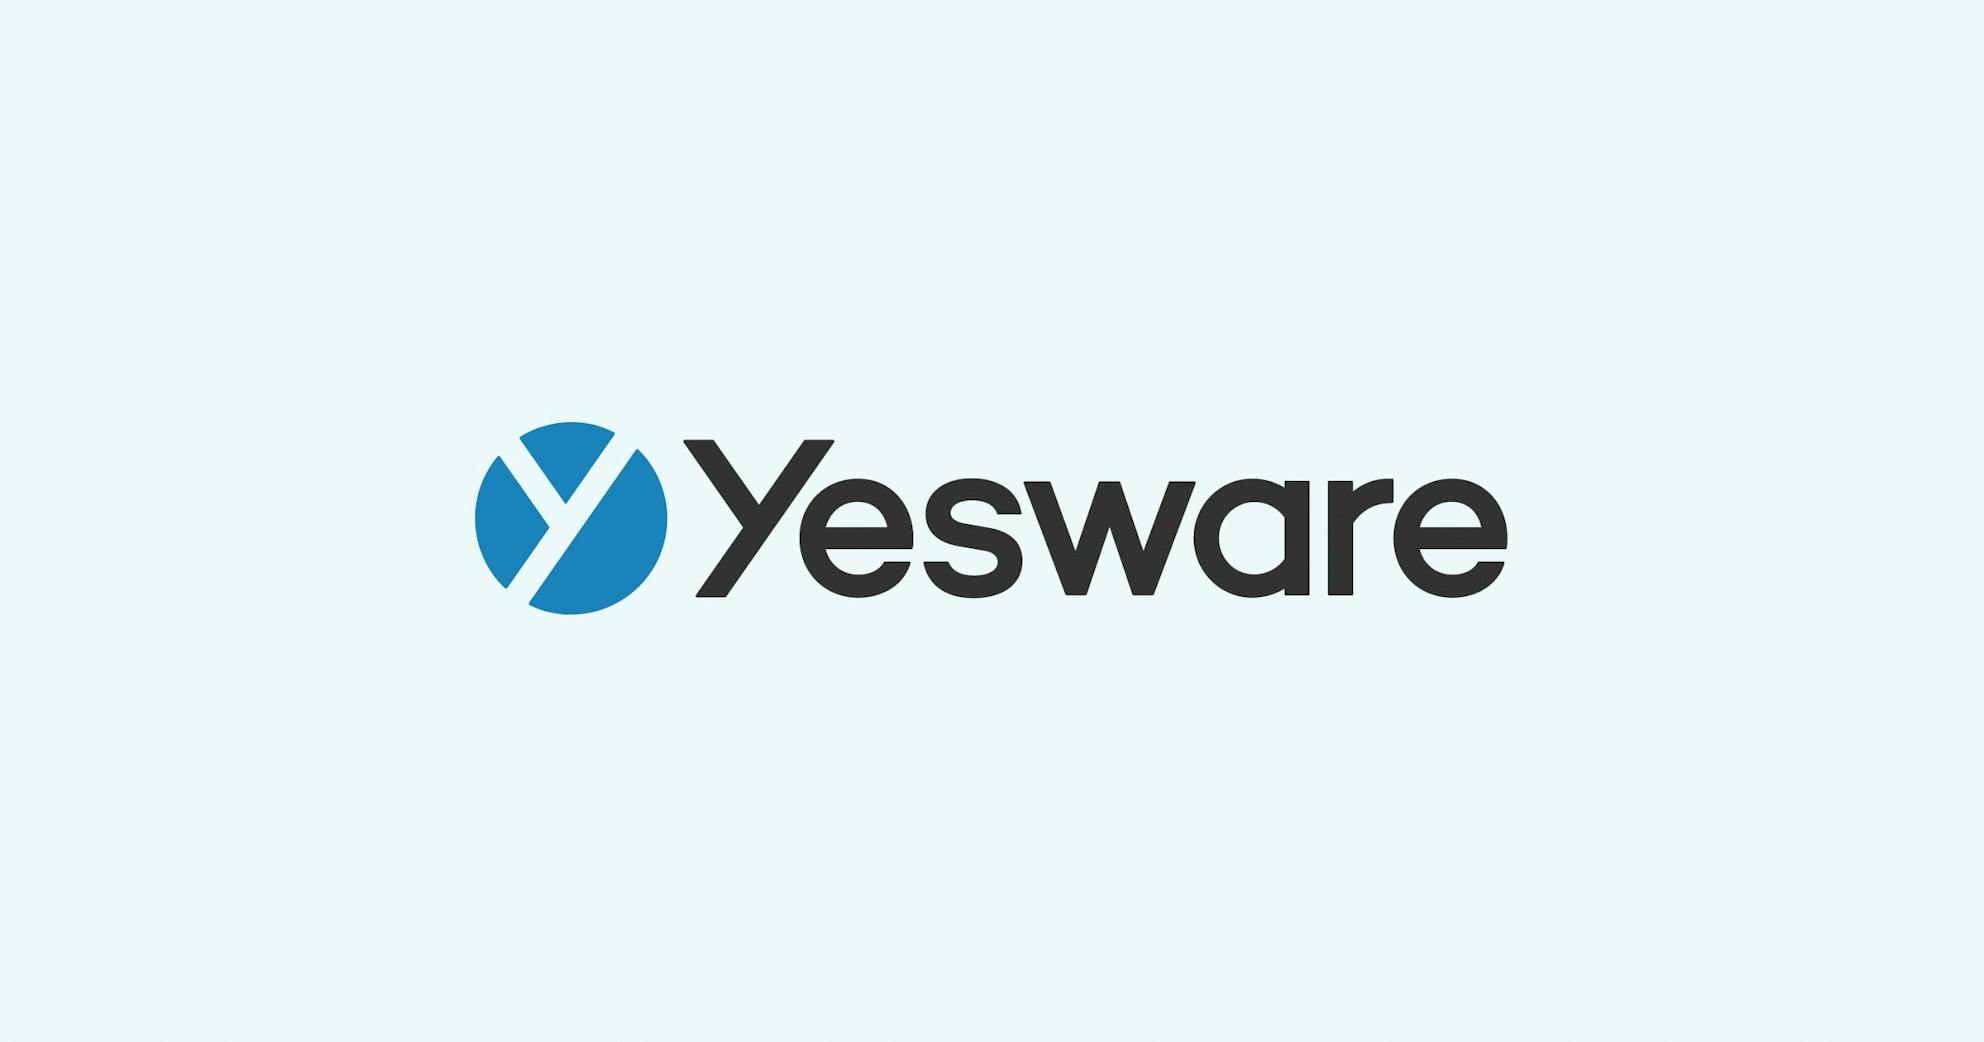 WEBINAR: Close Deals Faster by Optimizing Email Prospecting with Yesware